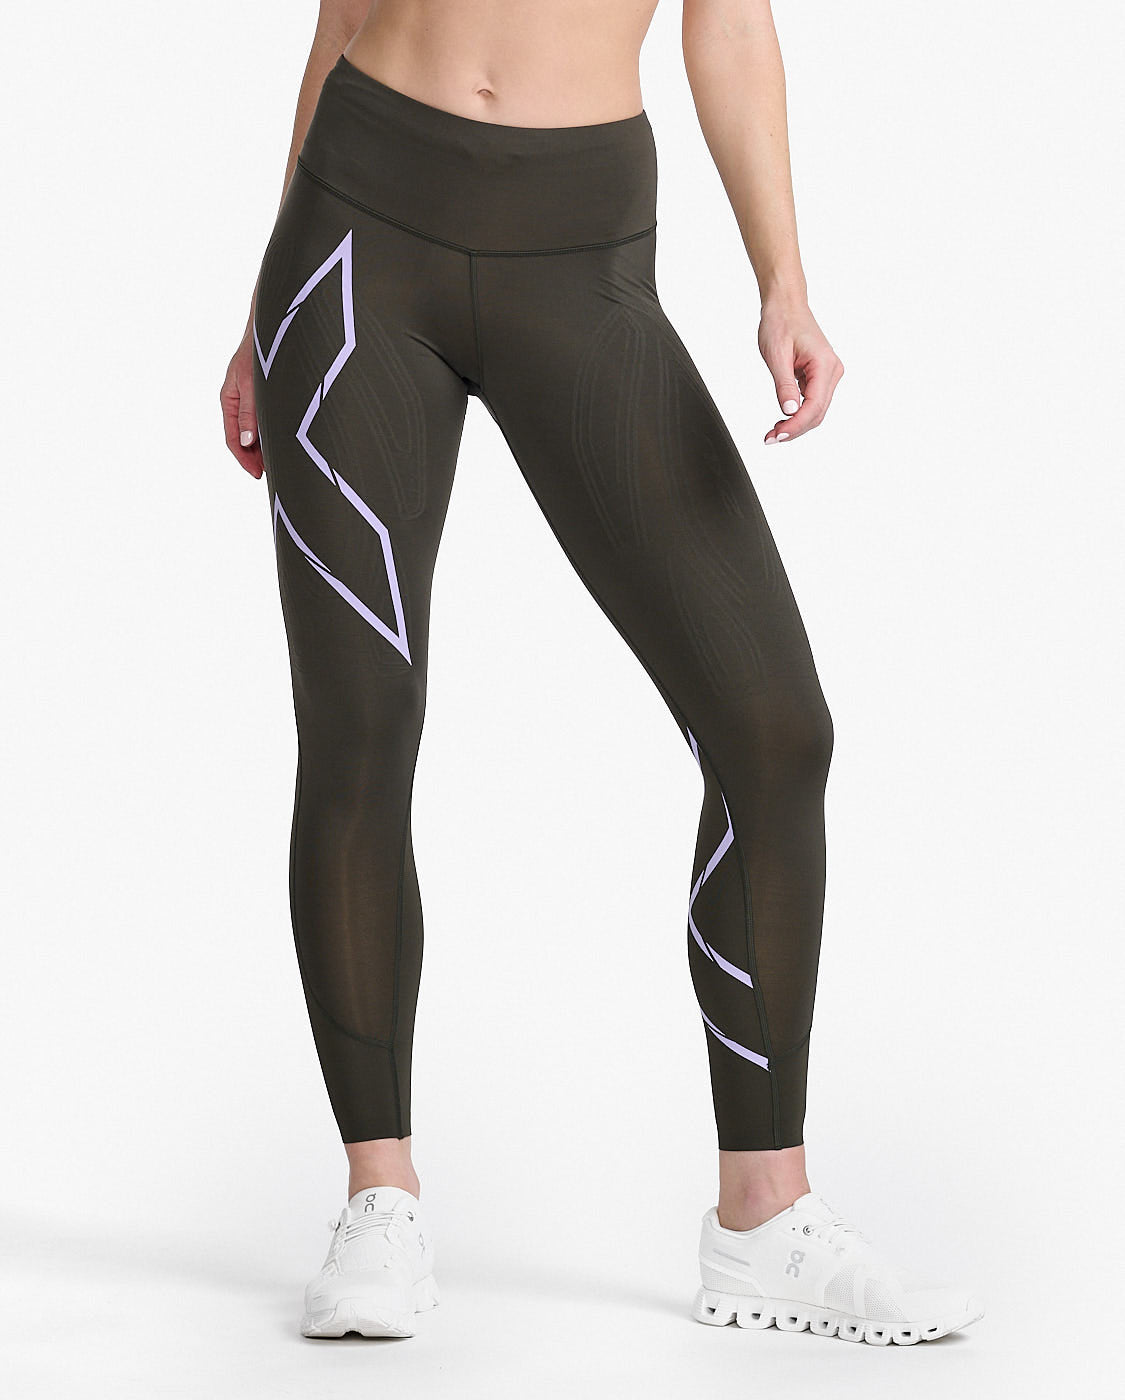 Women's Light Speed Mid-Rise Compression Tights BEET/BEET REFLECTIVE, Buy  Women's Light Speed Mid-Rise Compression Tights BEET/BEET REFLECTIVE here